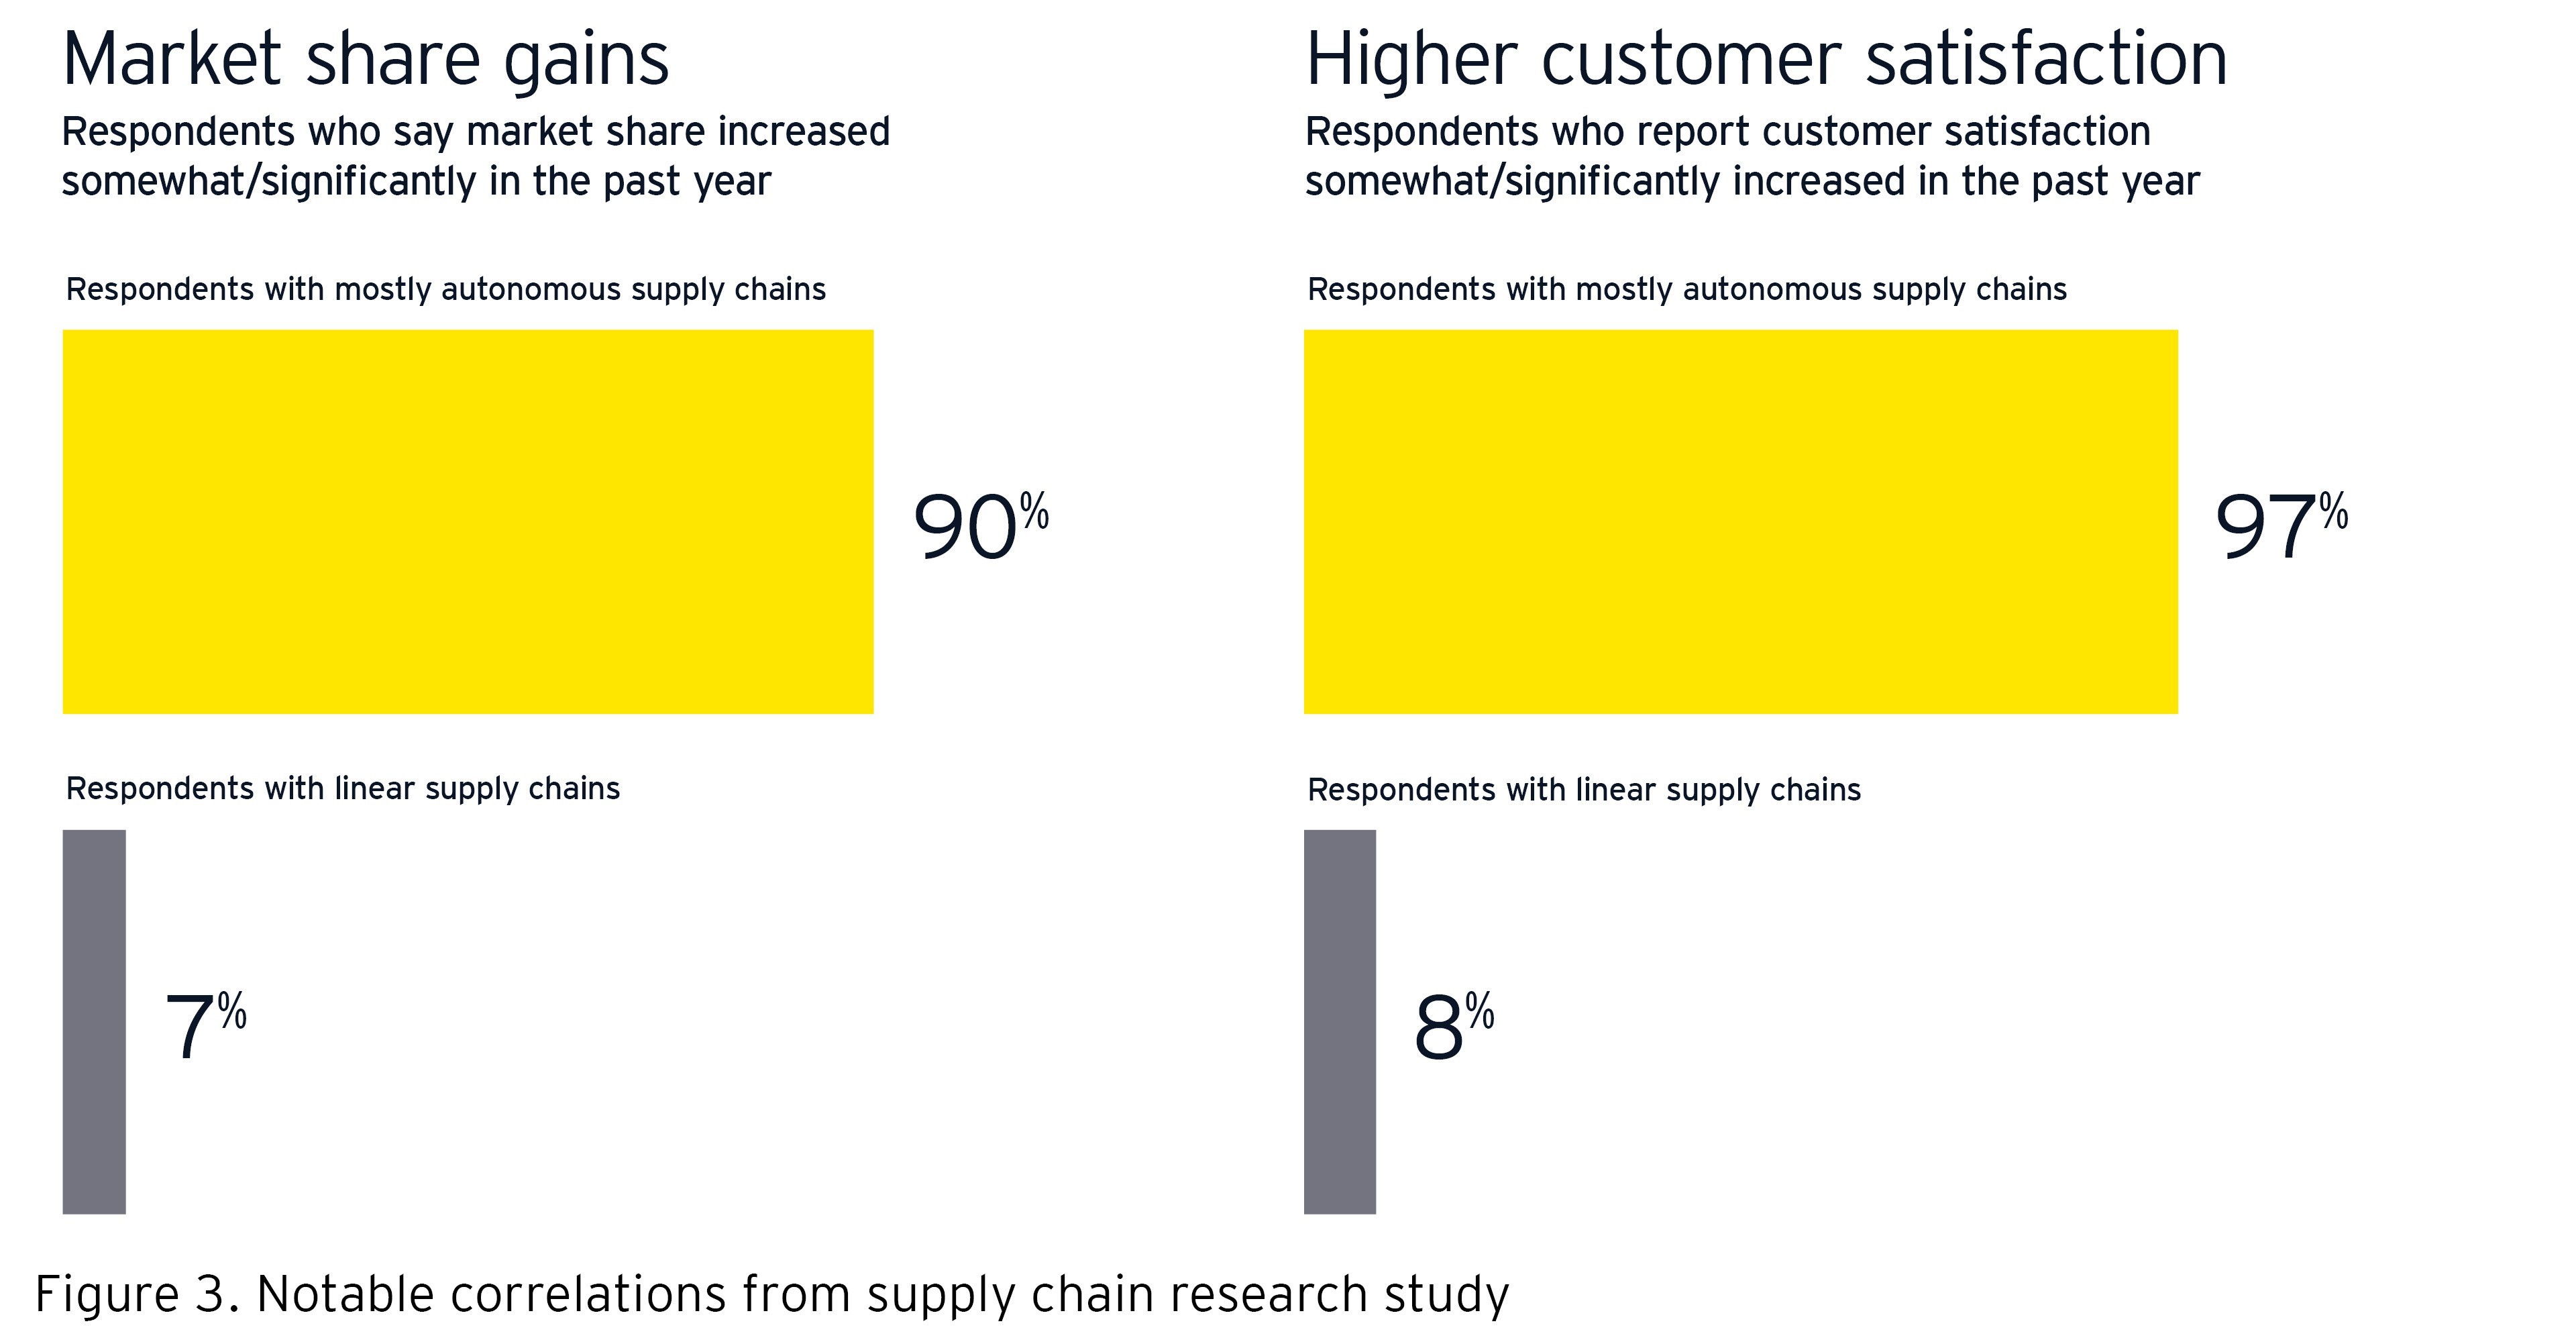 Notable correlations from supply chain research study